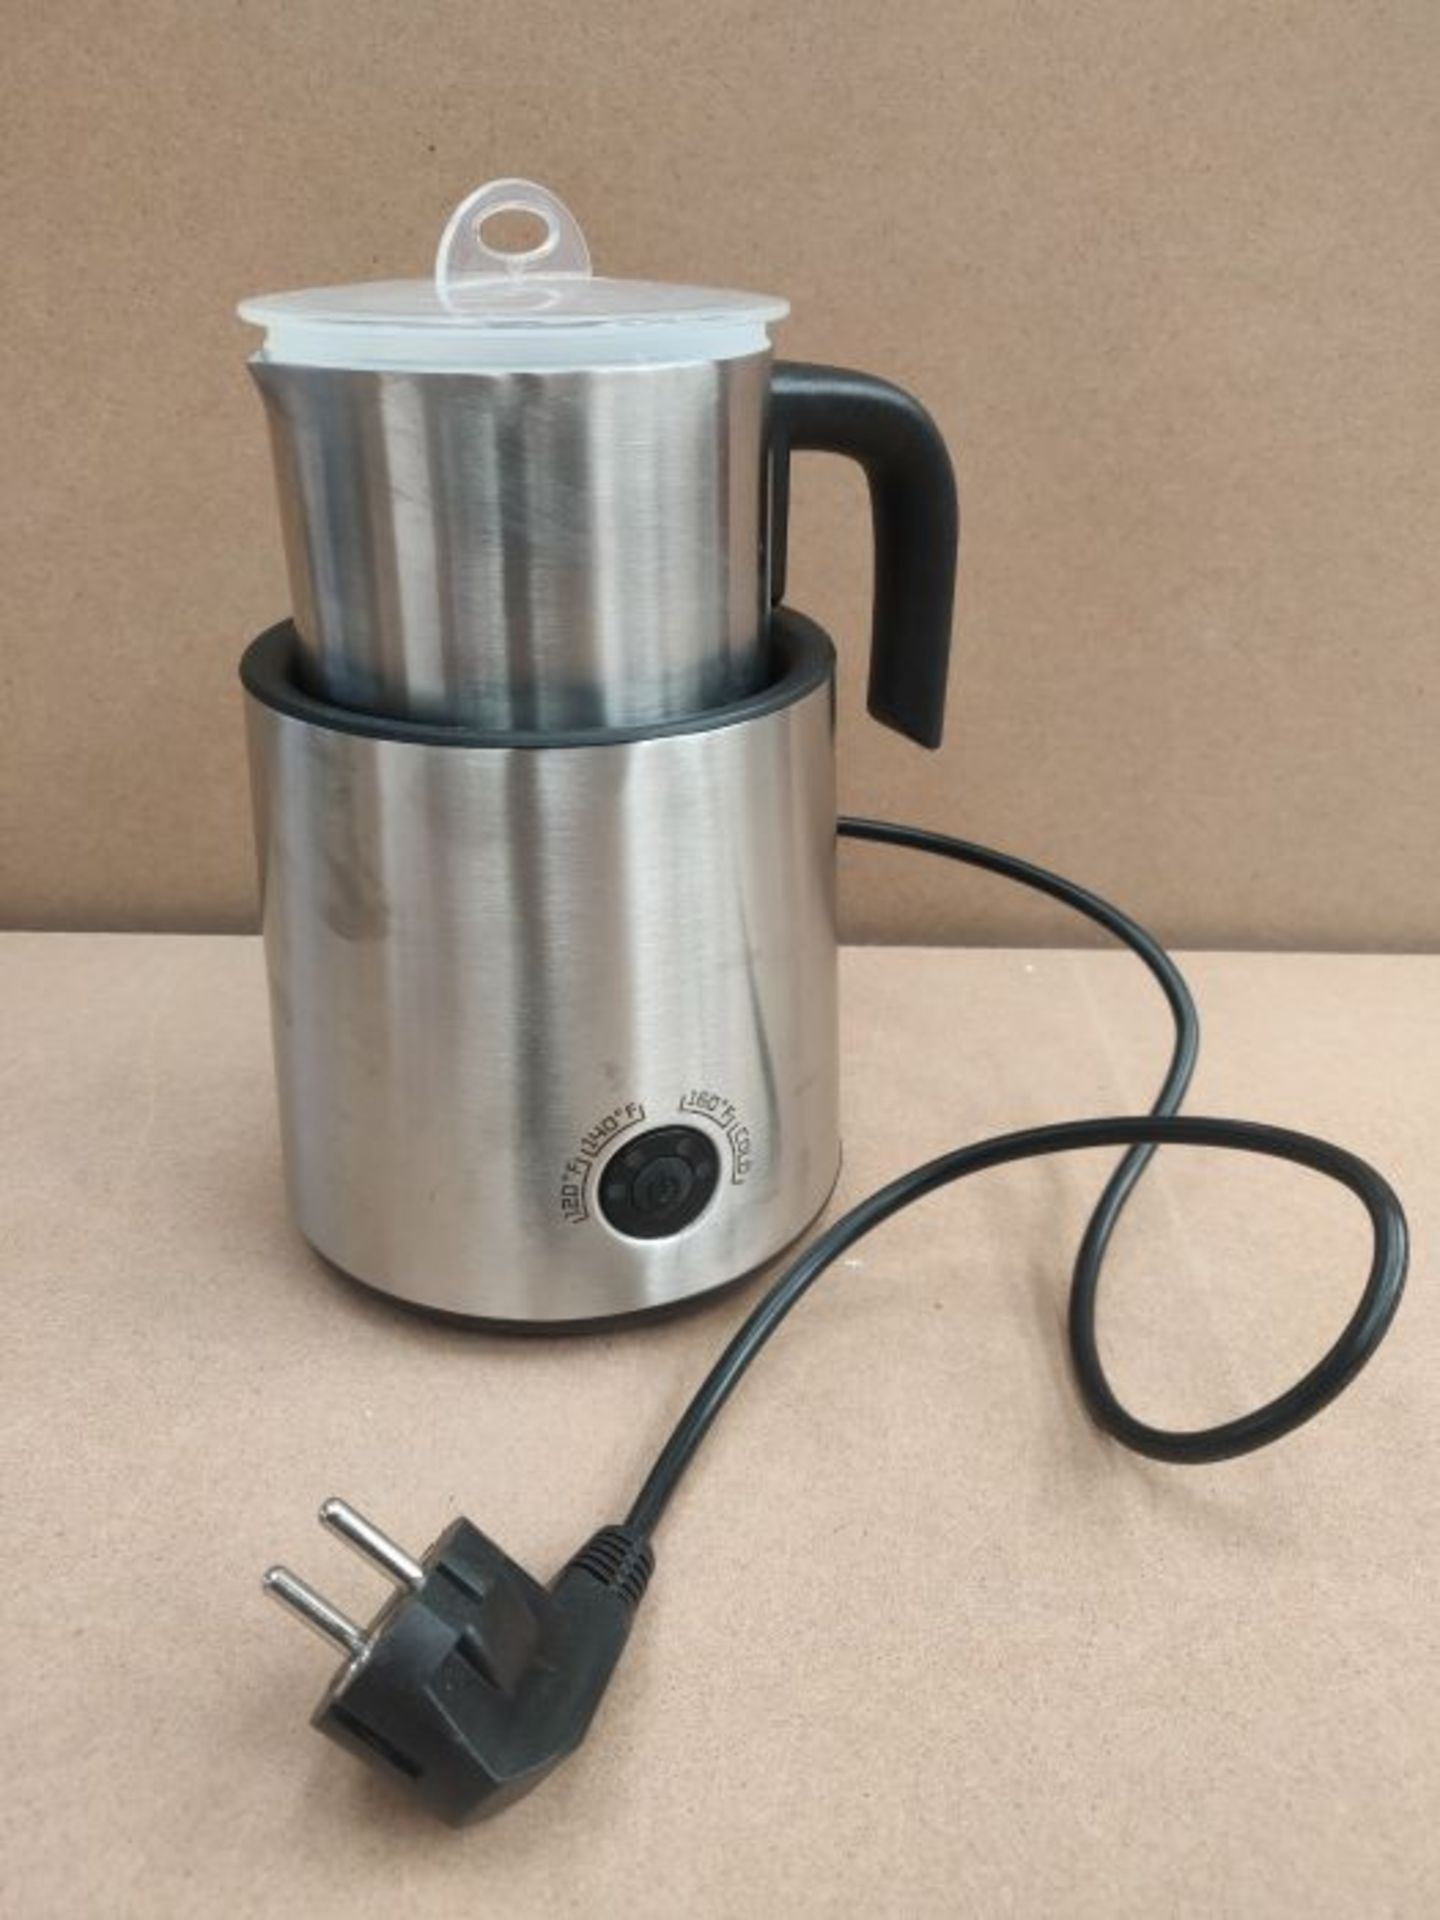 NWOUIIAY Milk Frother Automatic Removable Non-Stick Coating Hot or Cold Milk Foam for - Image 2 of 3